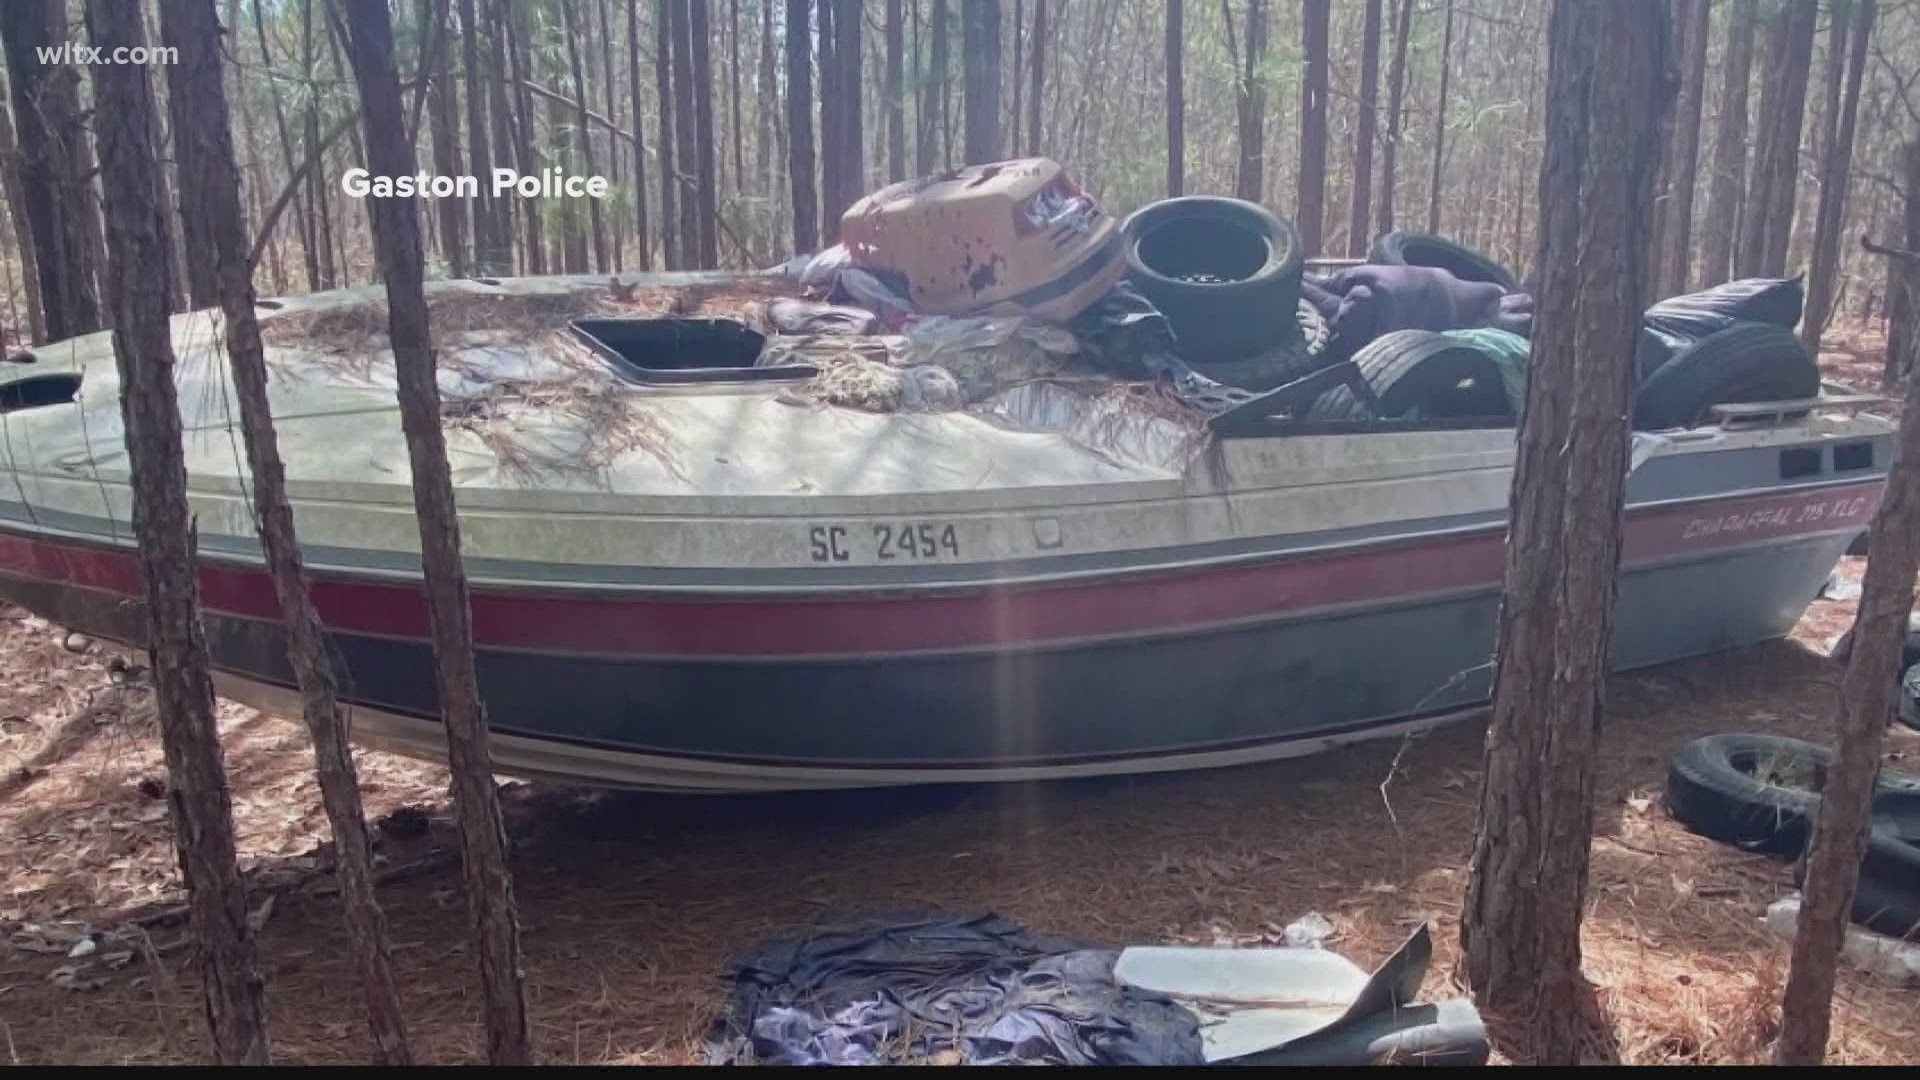 On backroads, police are seeing up to 40 pounds of illegal dumping. These items include beds, mattresses, toilets and other items.